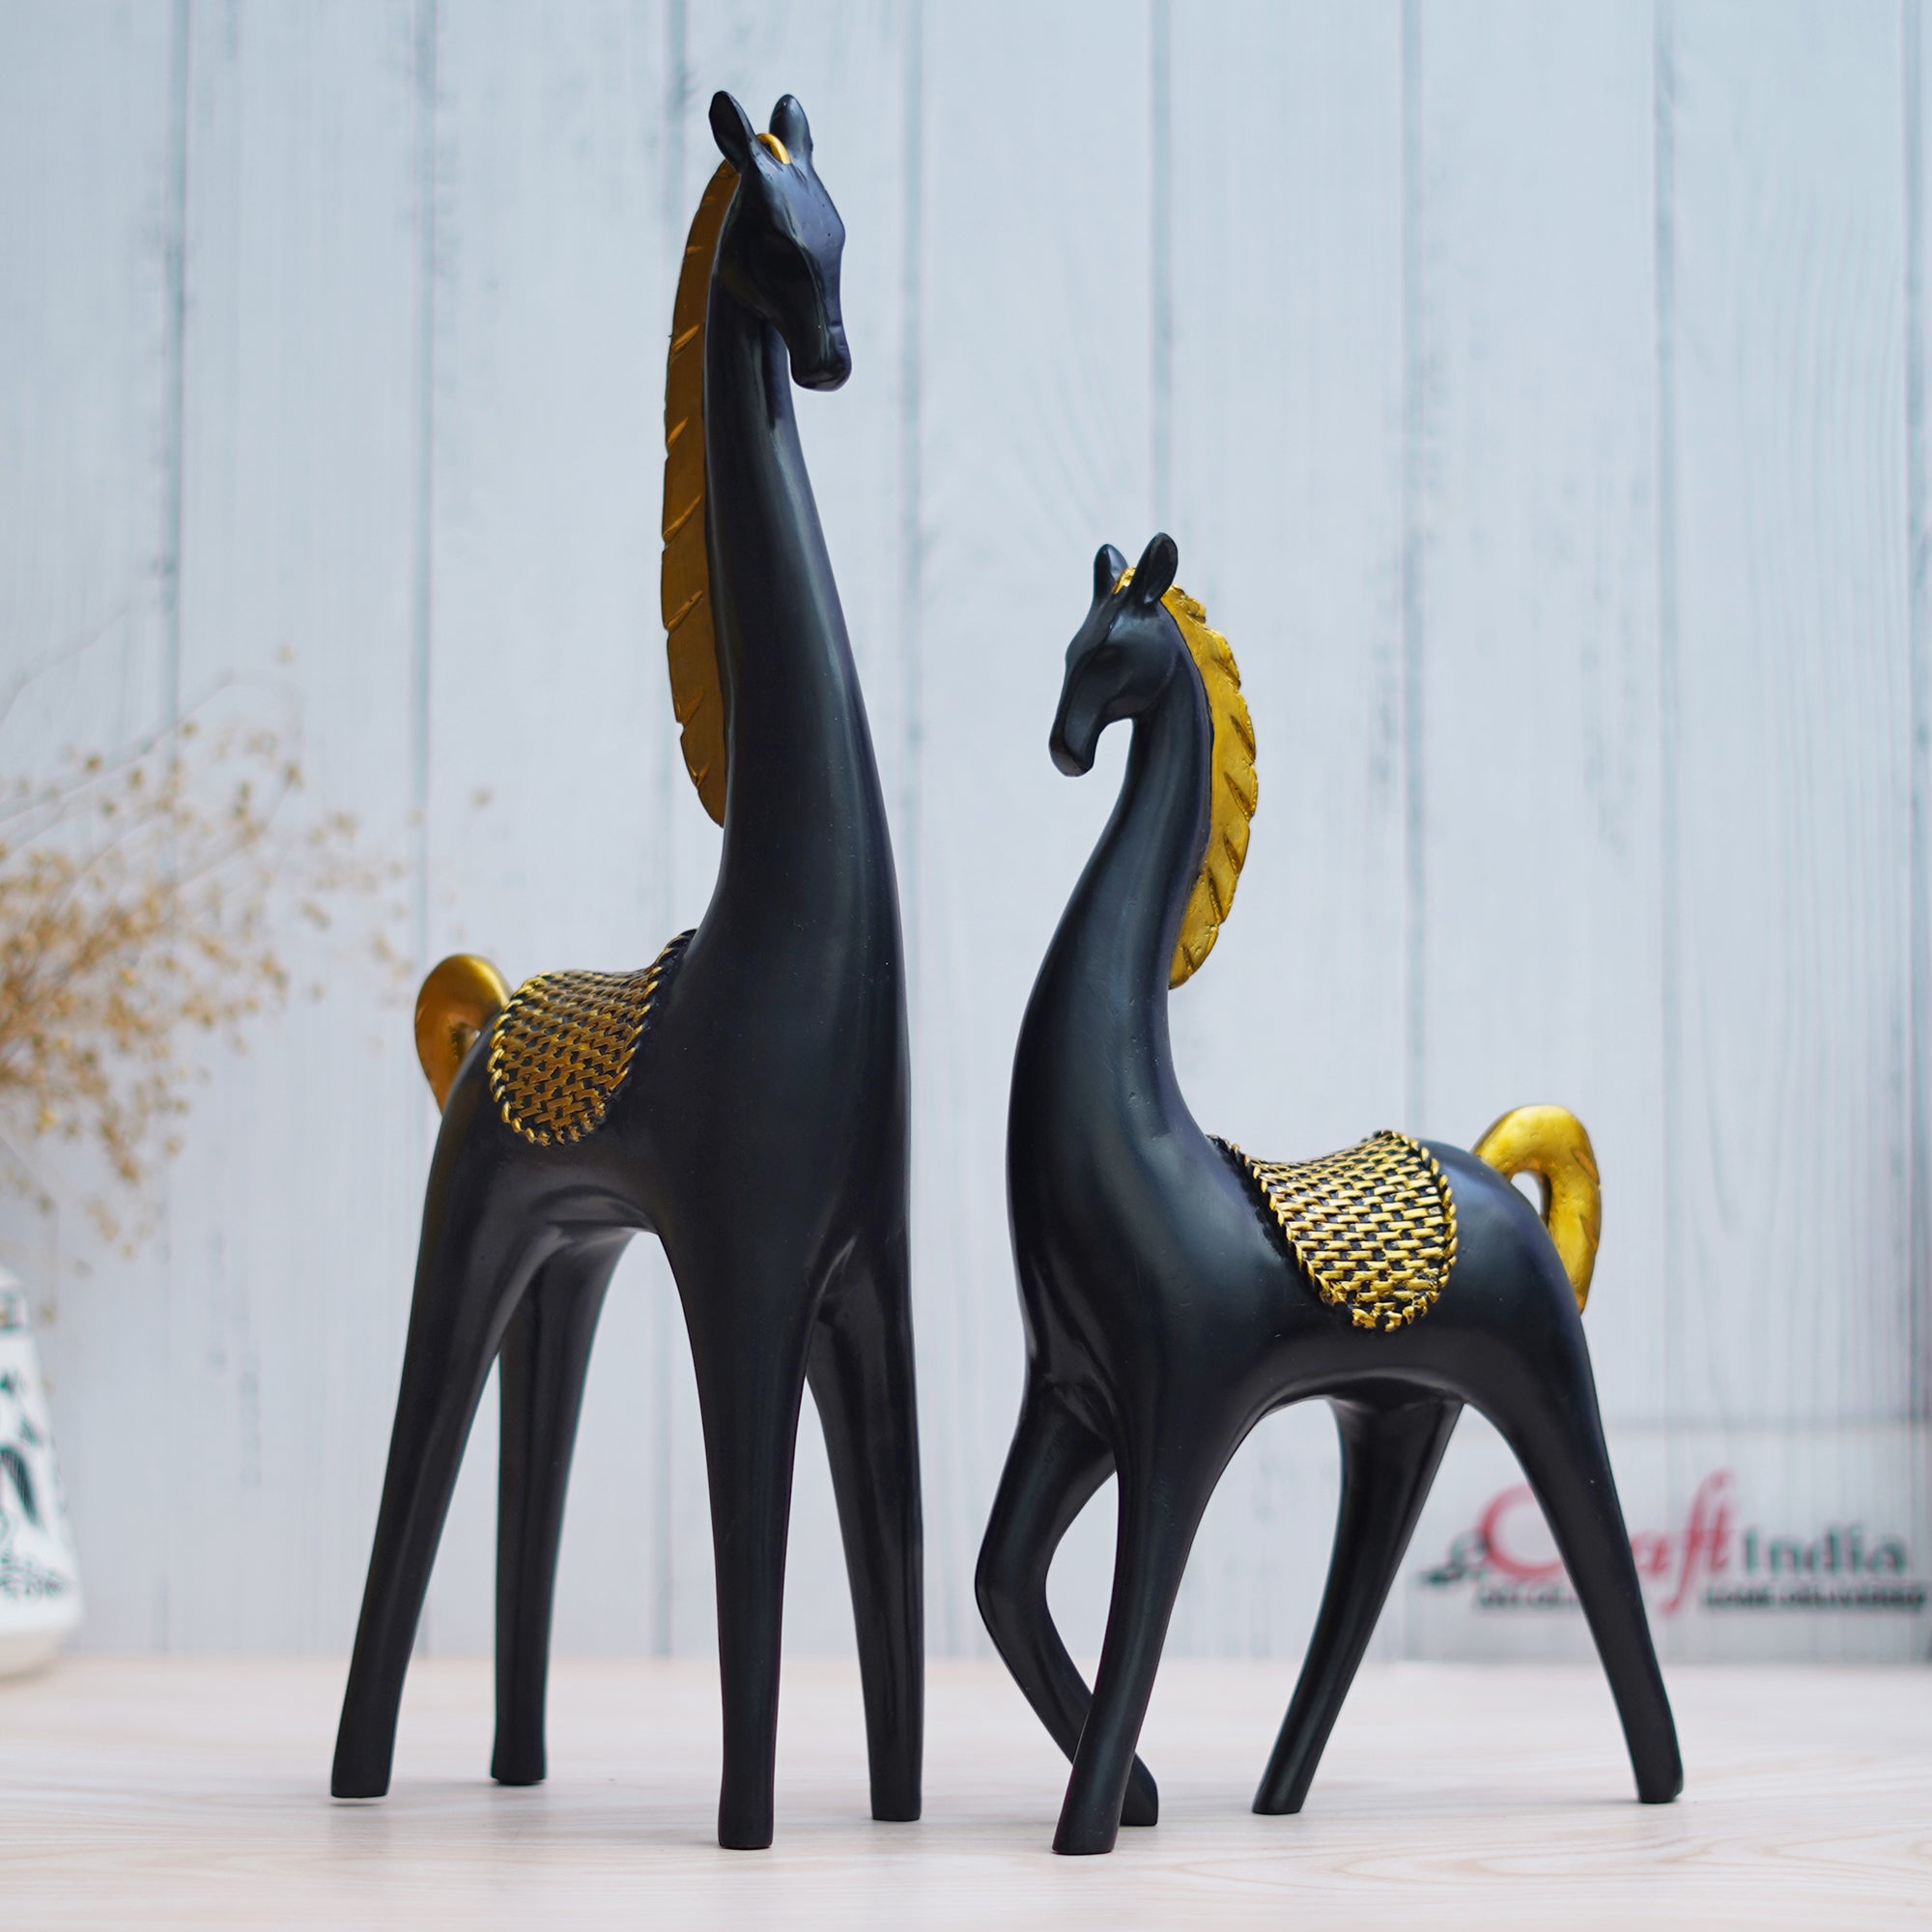 Set of 2 Black Horse Statues with Golden Hair Decorative Animal Figurines 5